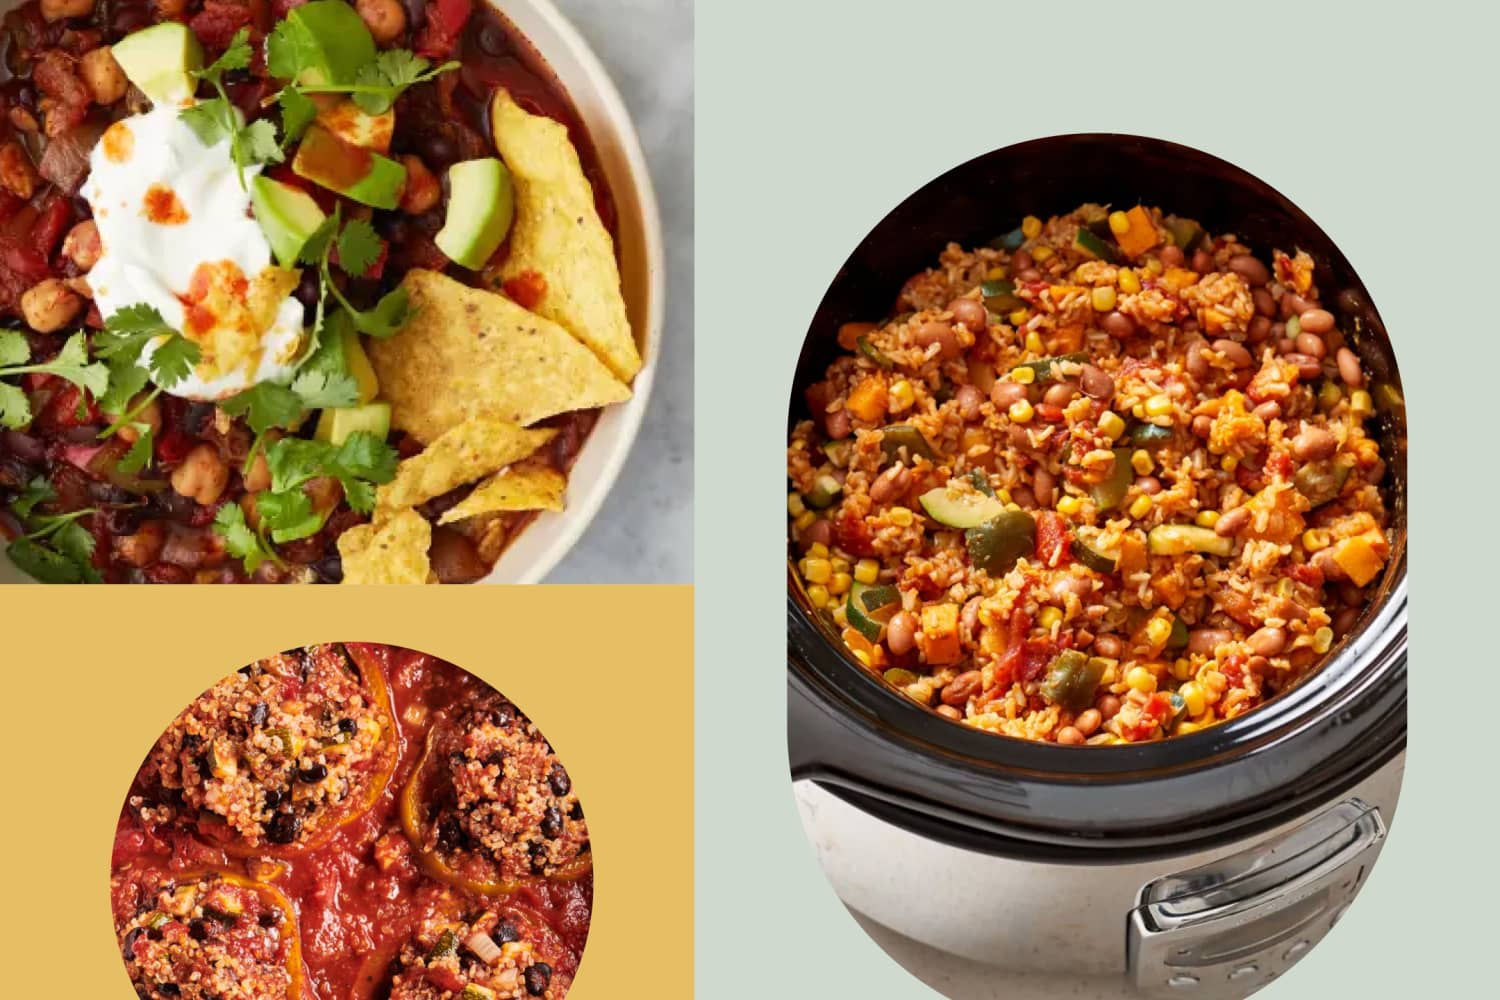 Why I recommend an inexpensive slow cooker for plant-based cooking